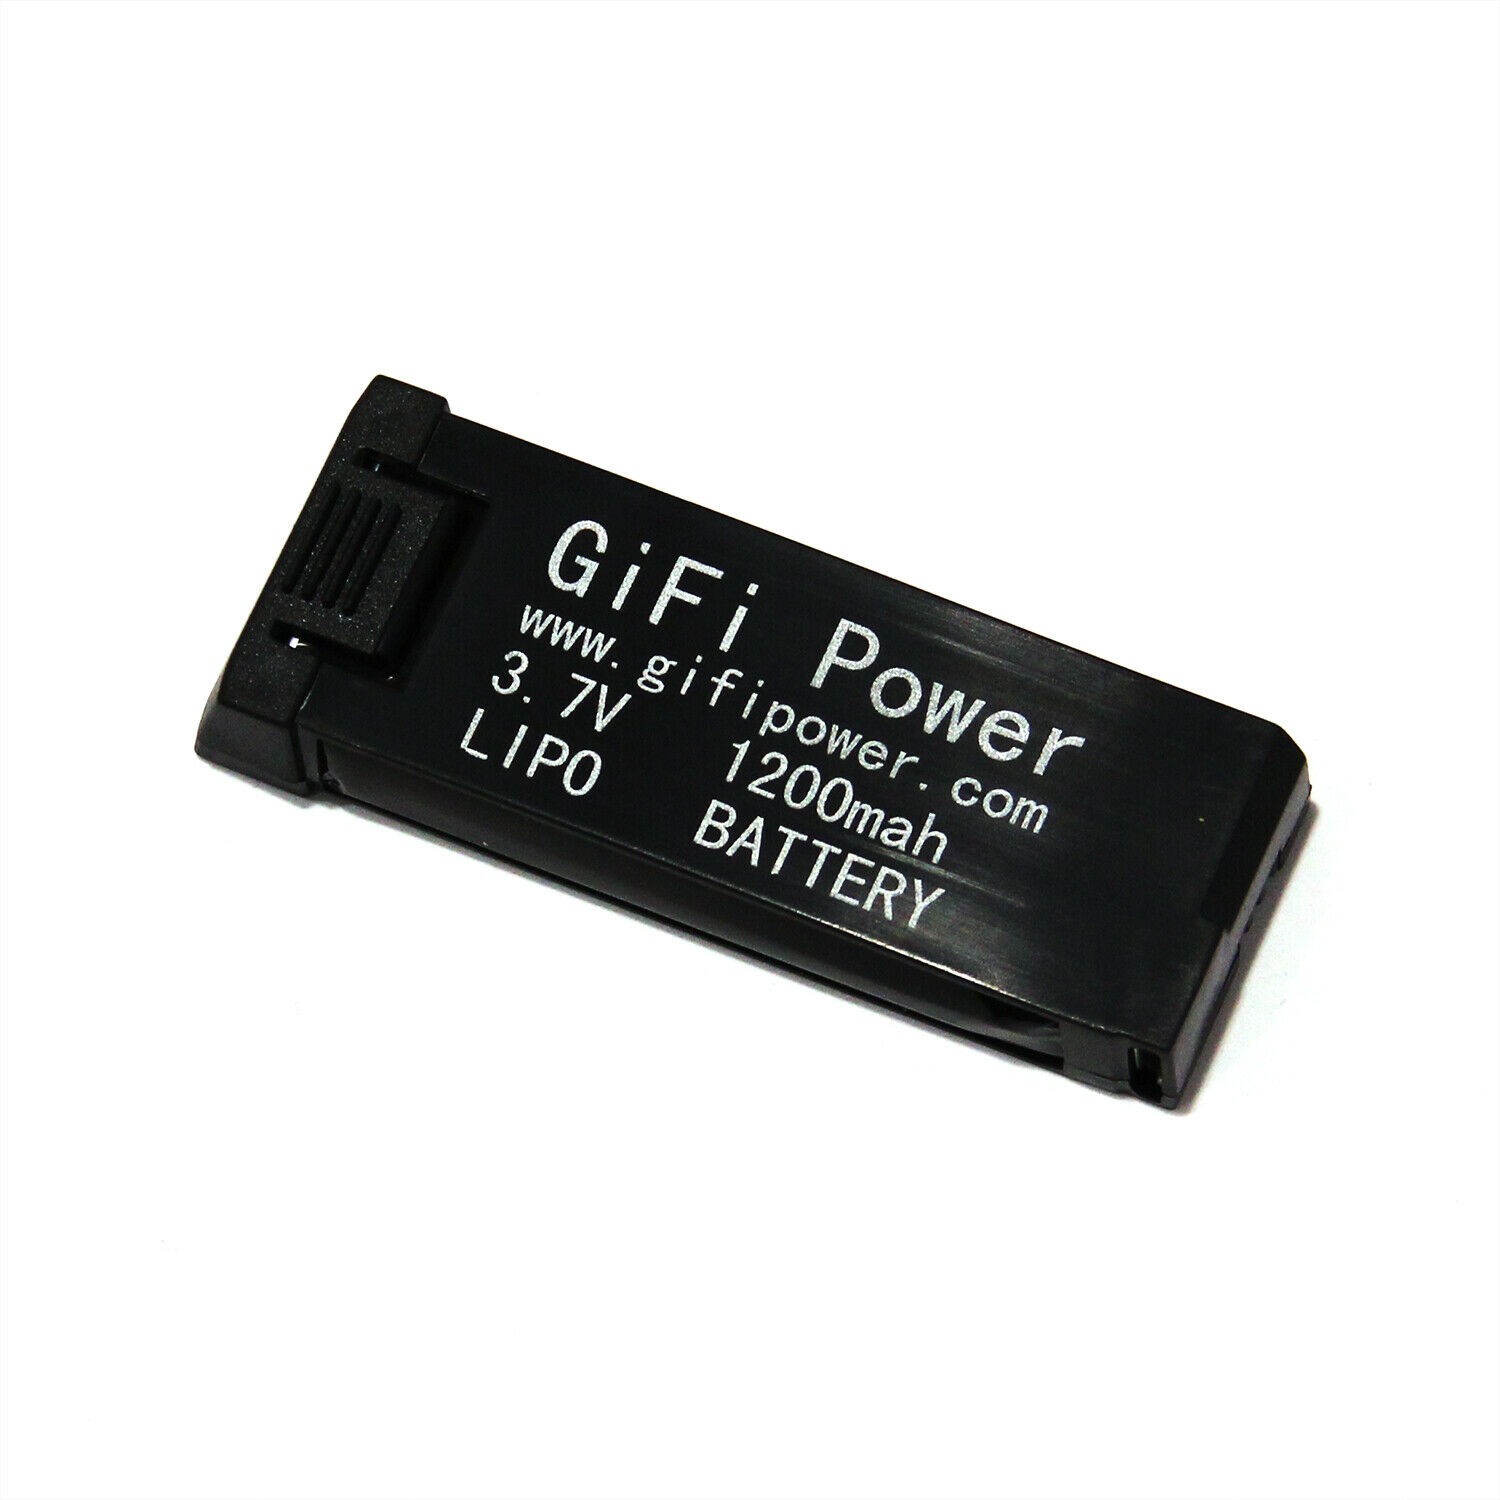 1200mAh Battery Replacement for Drone Quadcopter